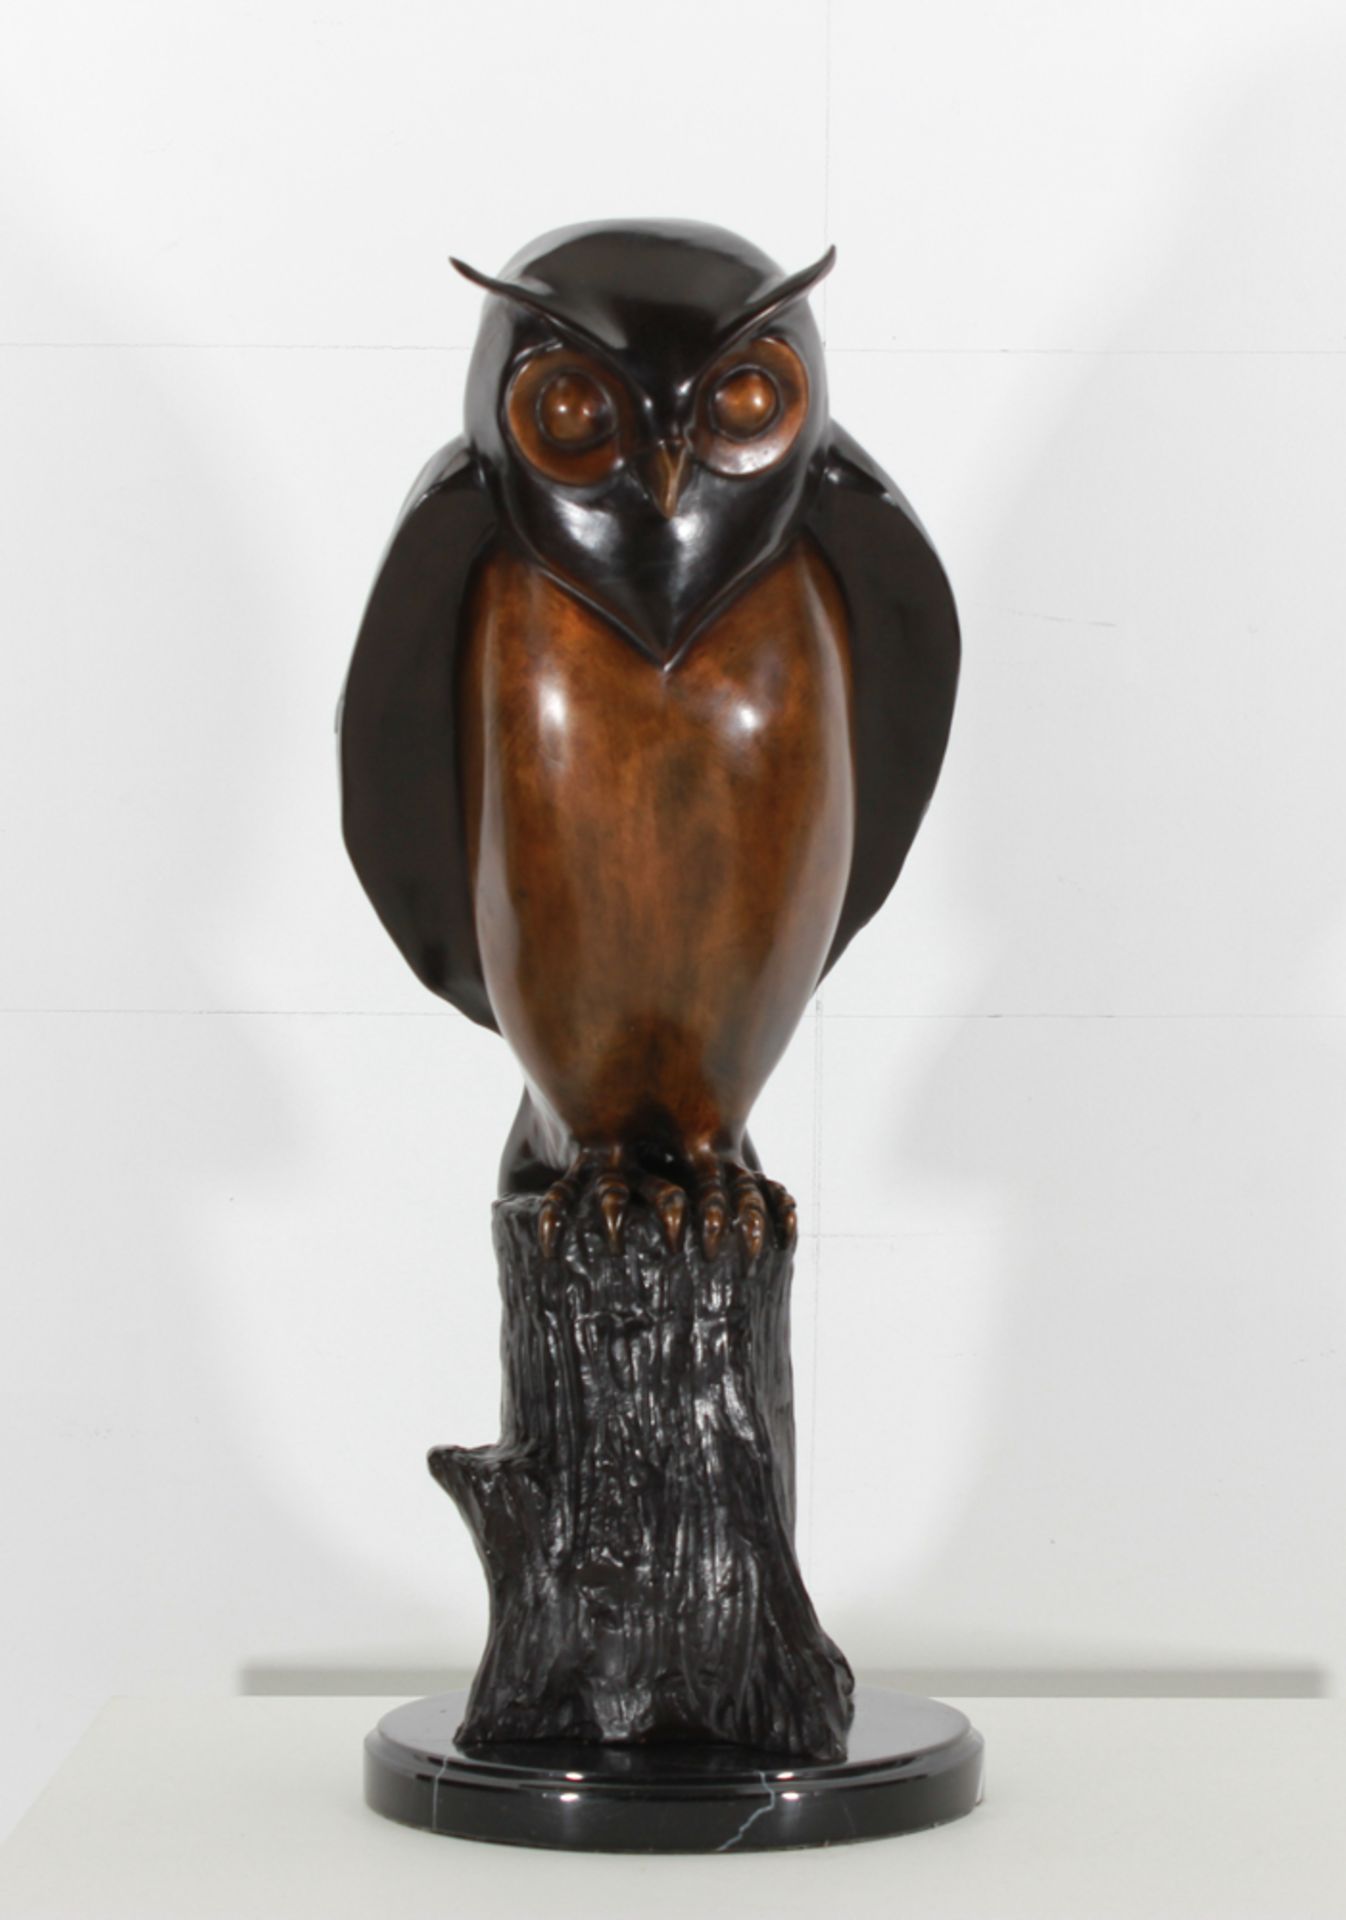 Bronze Bronze sculpture on marble plinth ** the Owl **, unsigned. - size height and width 50 X 25